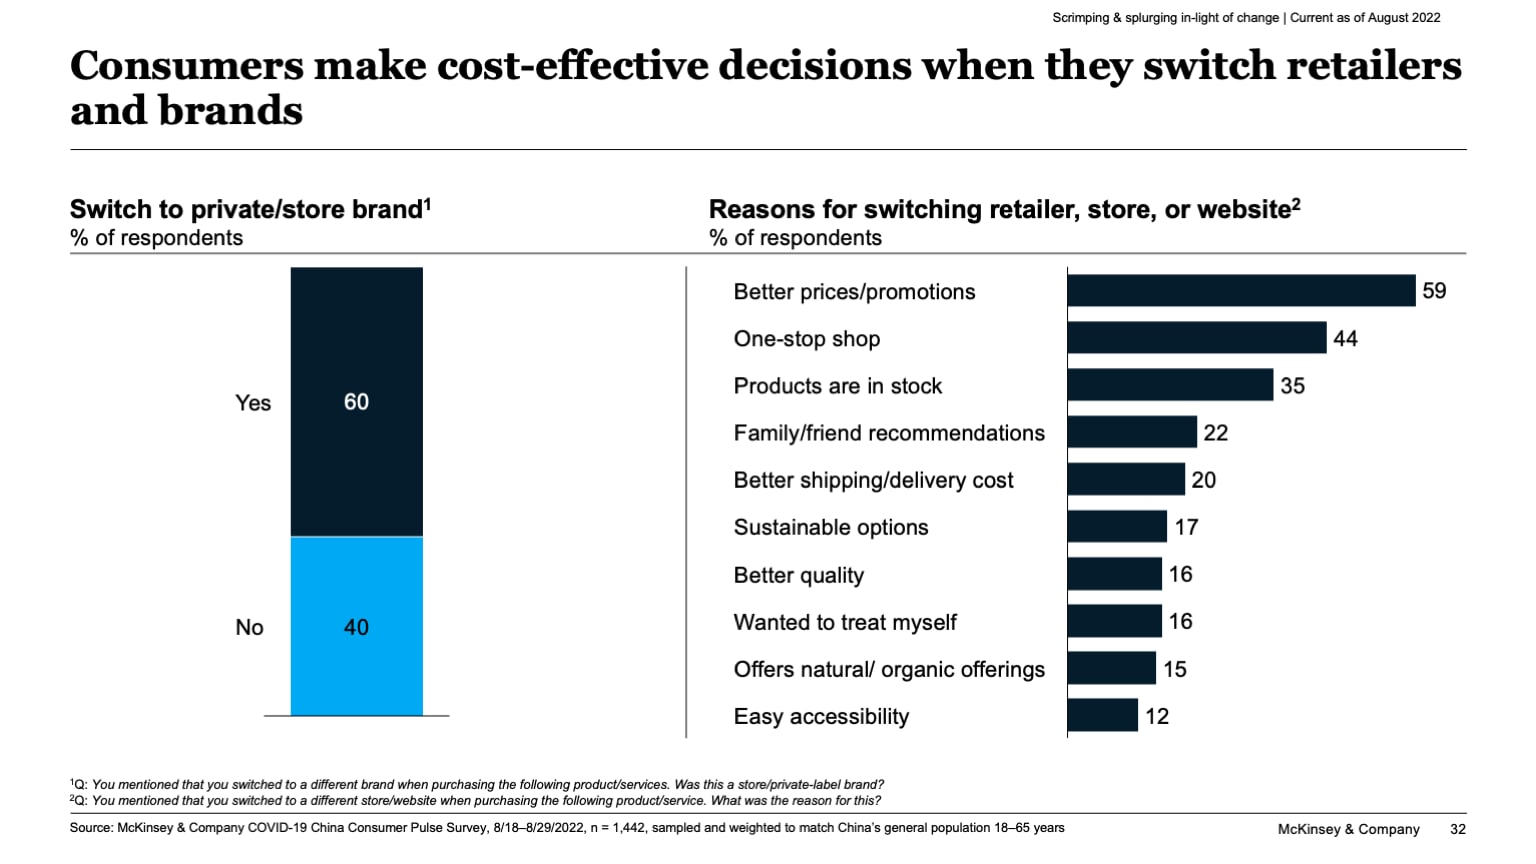 Consumers make cost-effective decisions when they switch retailers and brands